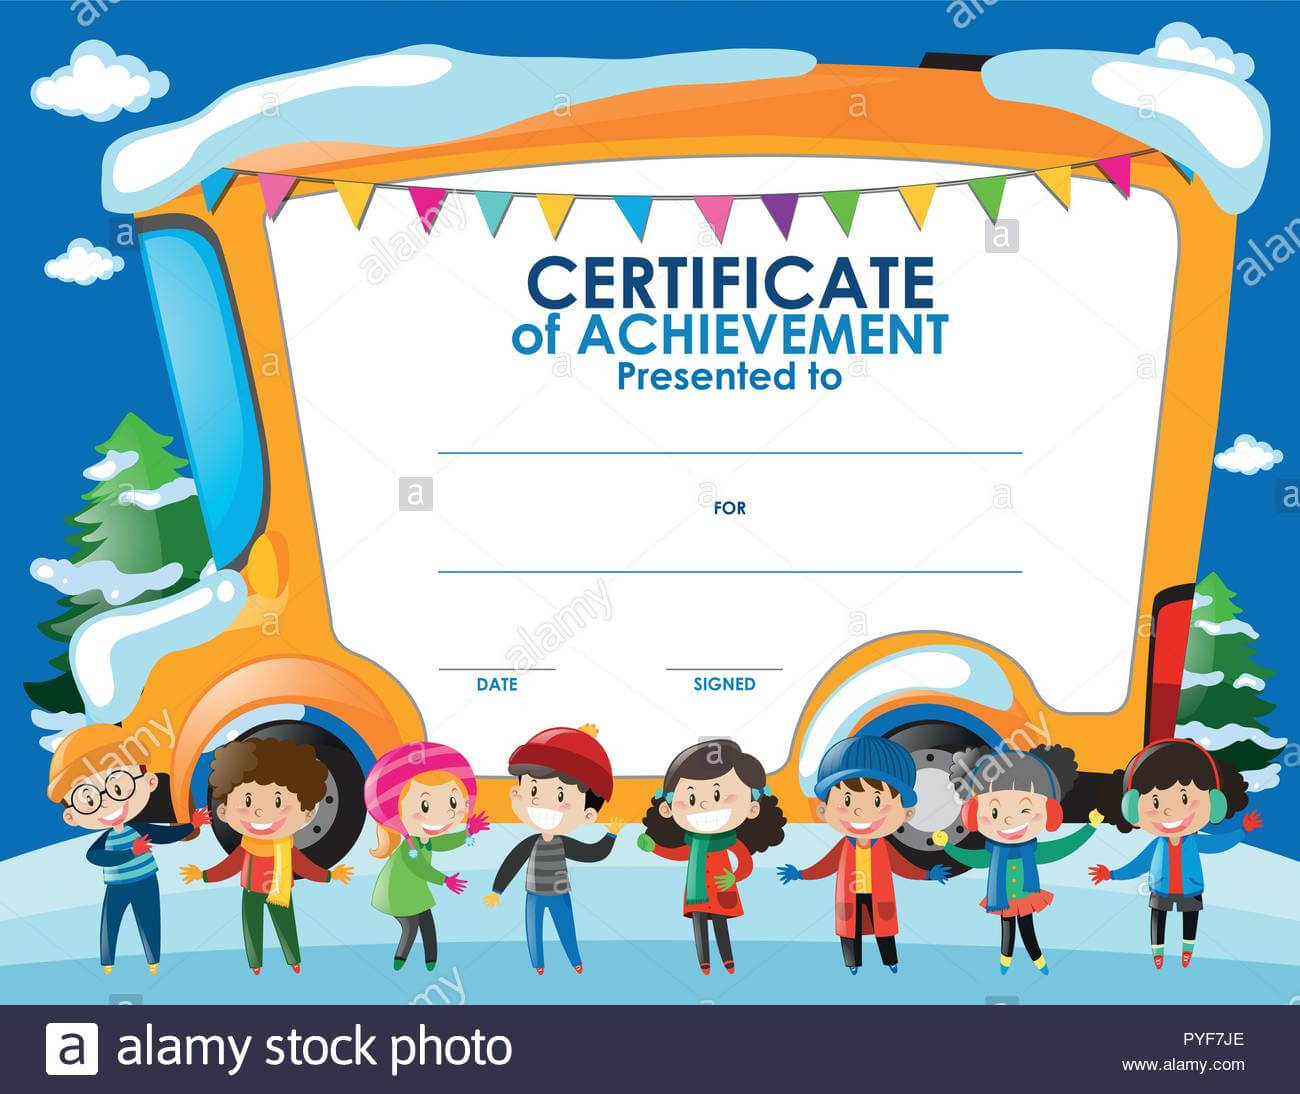 Certificate Template With Children In Winter Illustration Pertaining To Certificate Of Achievement Template For Kids